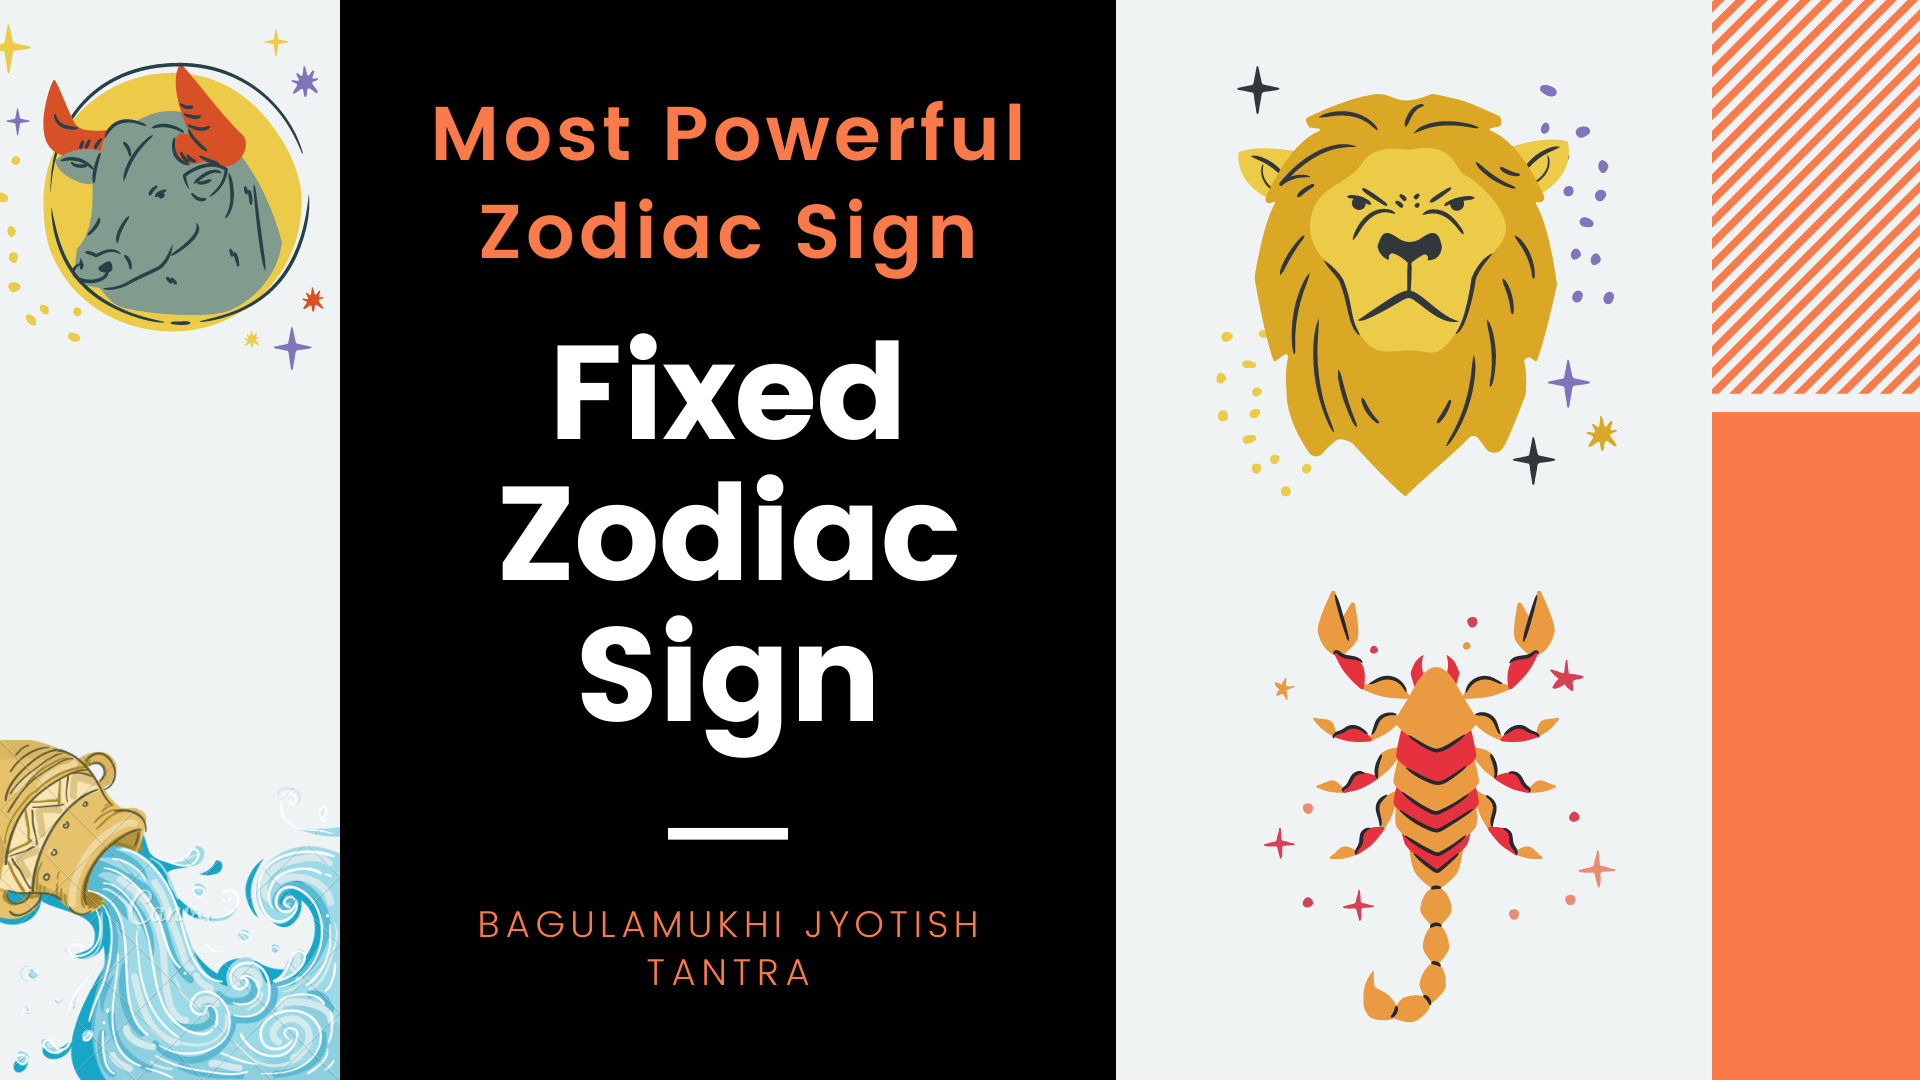 Zodiac sign most powerful is the which Top 4